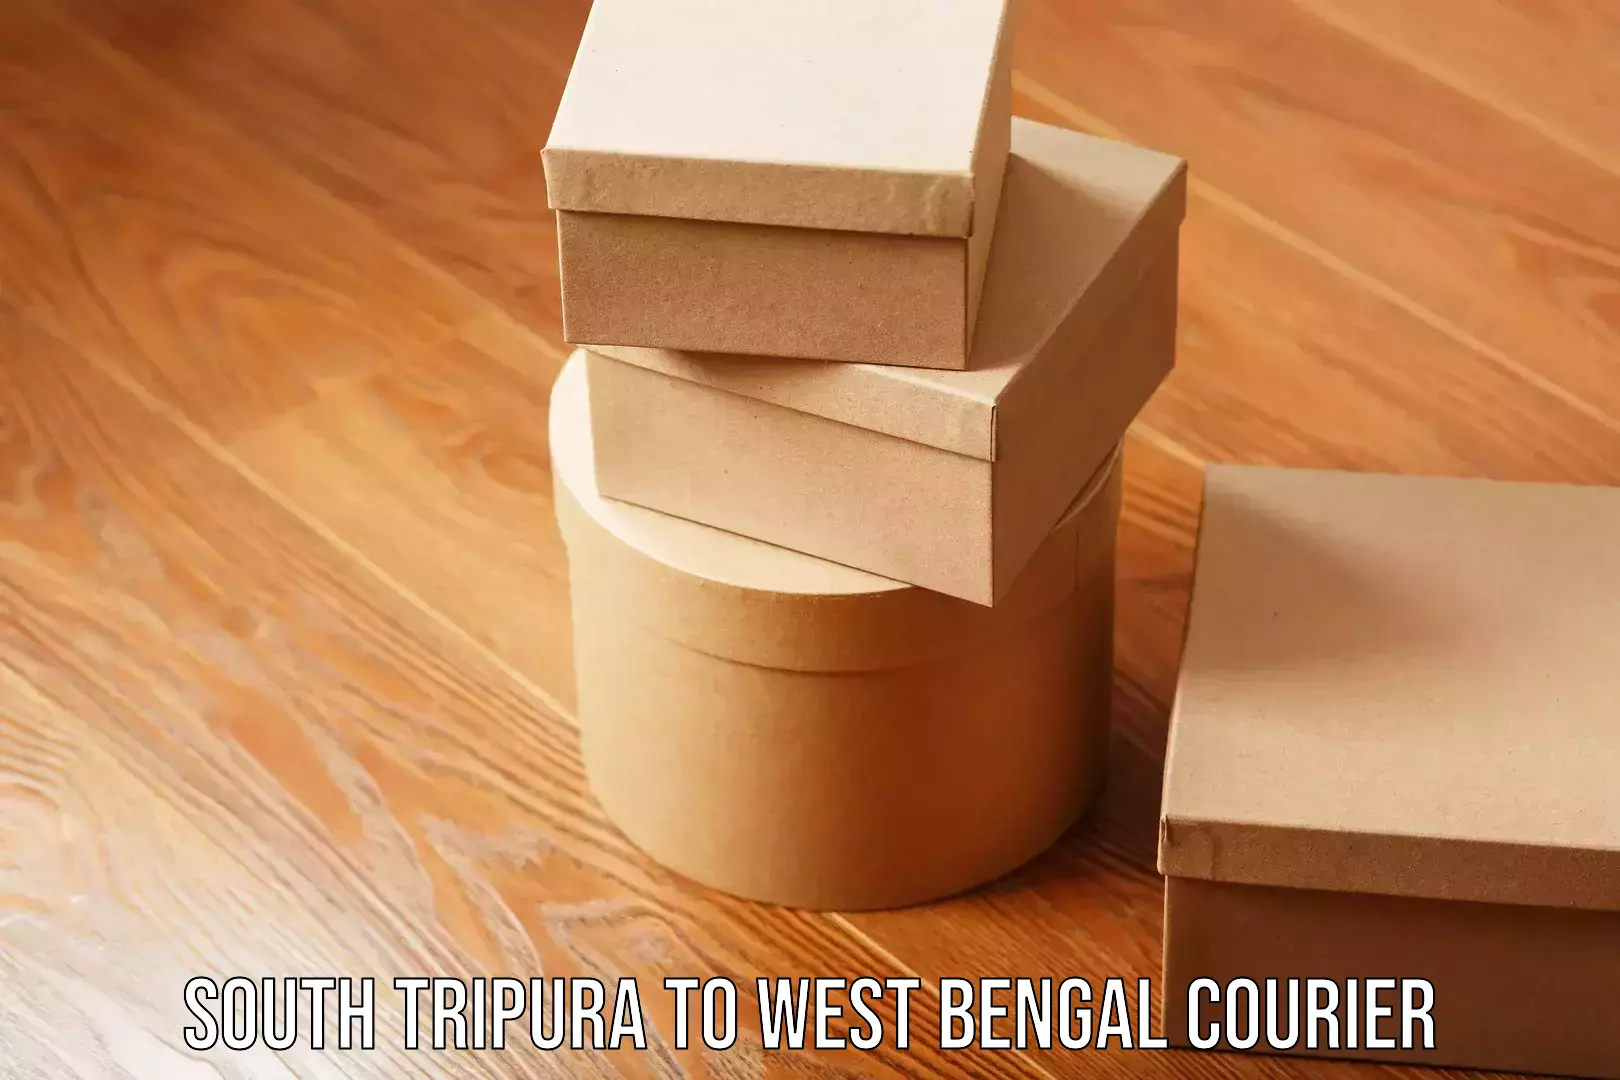 On-demand shipping options in South Tripura to West Bengal